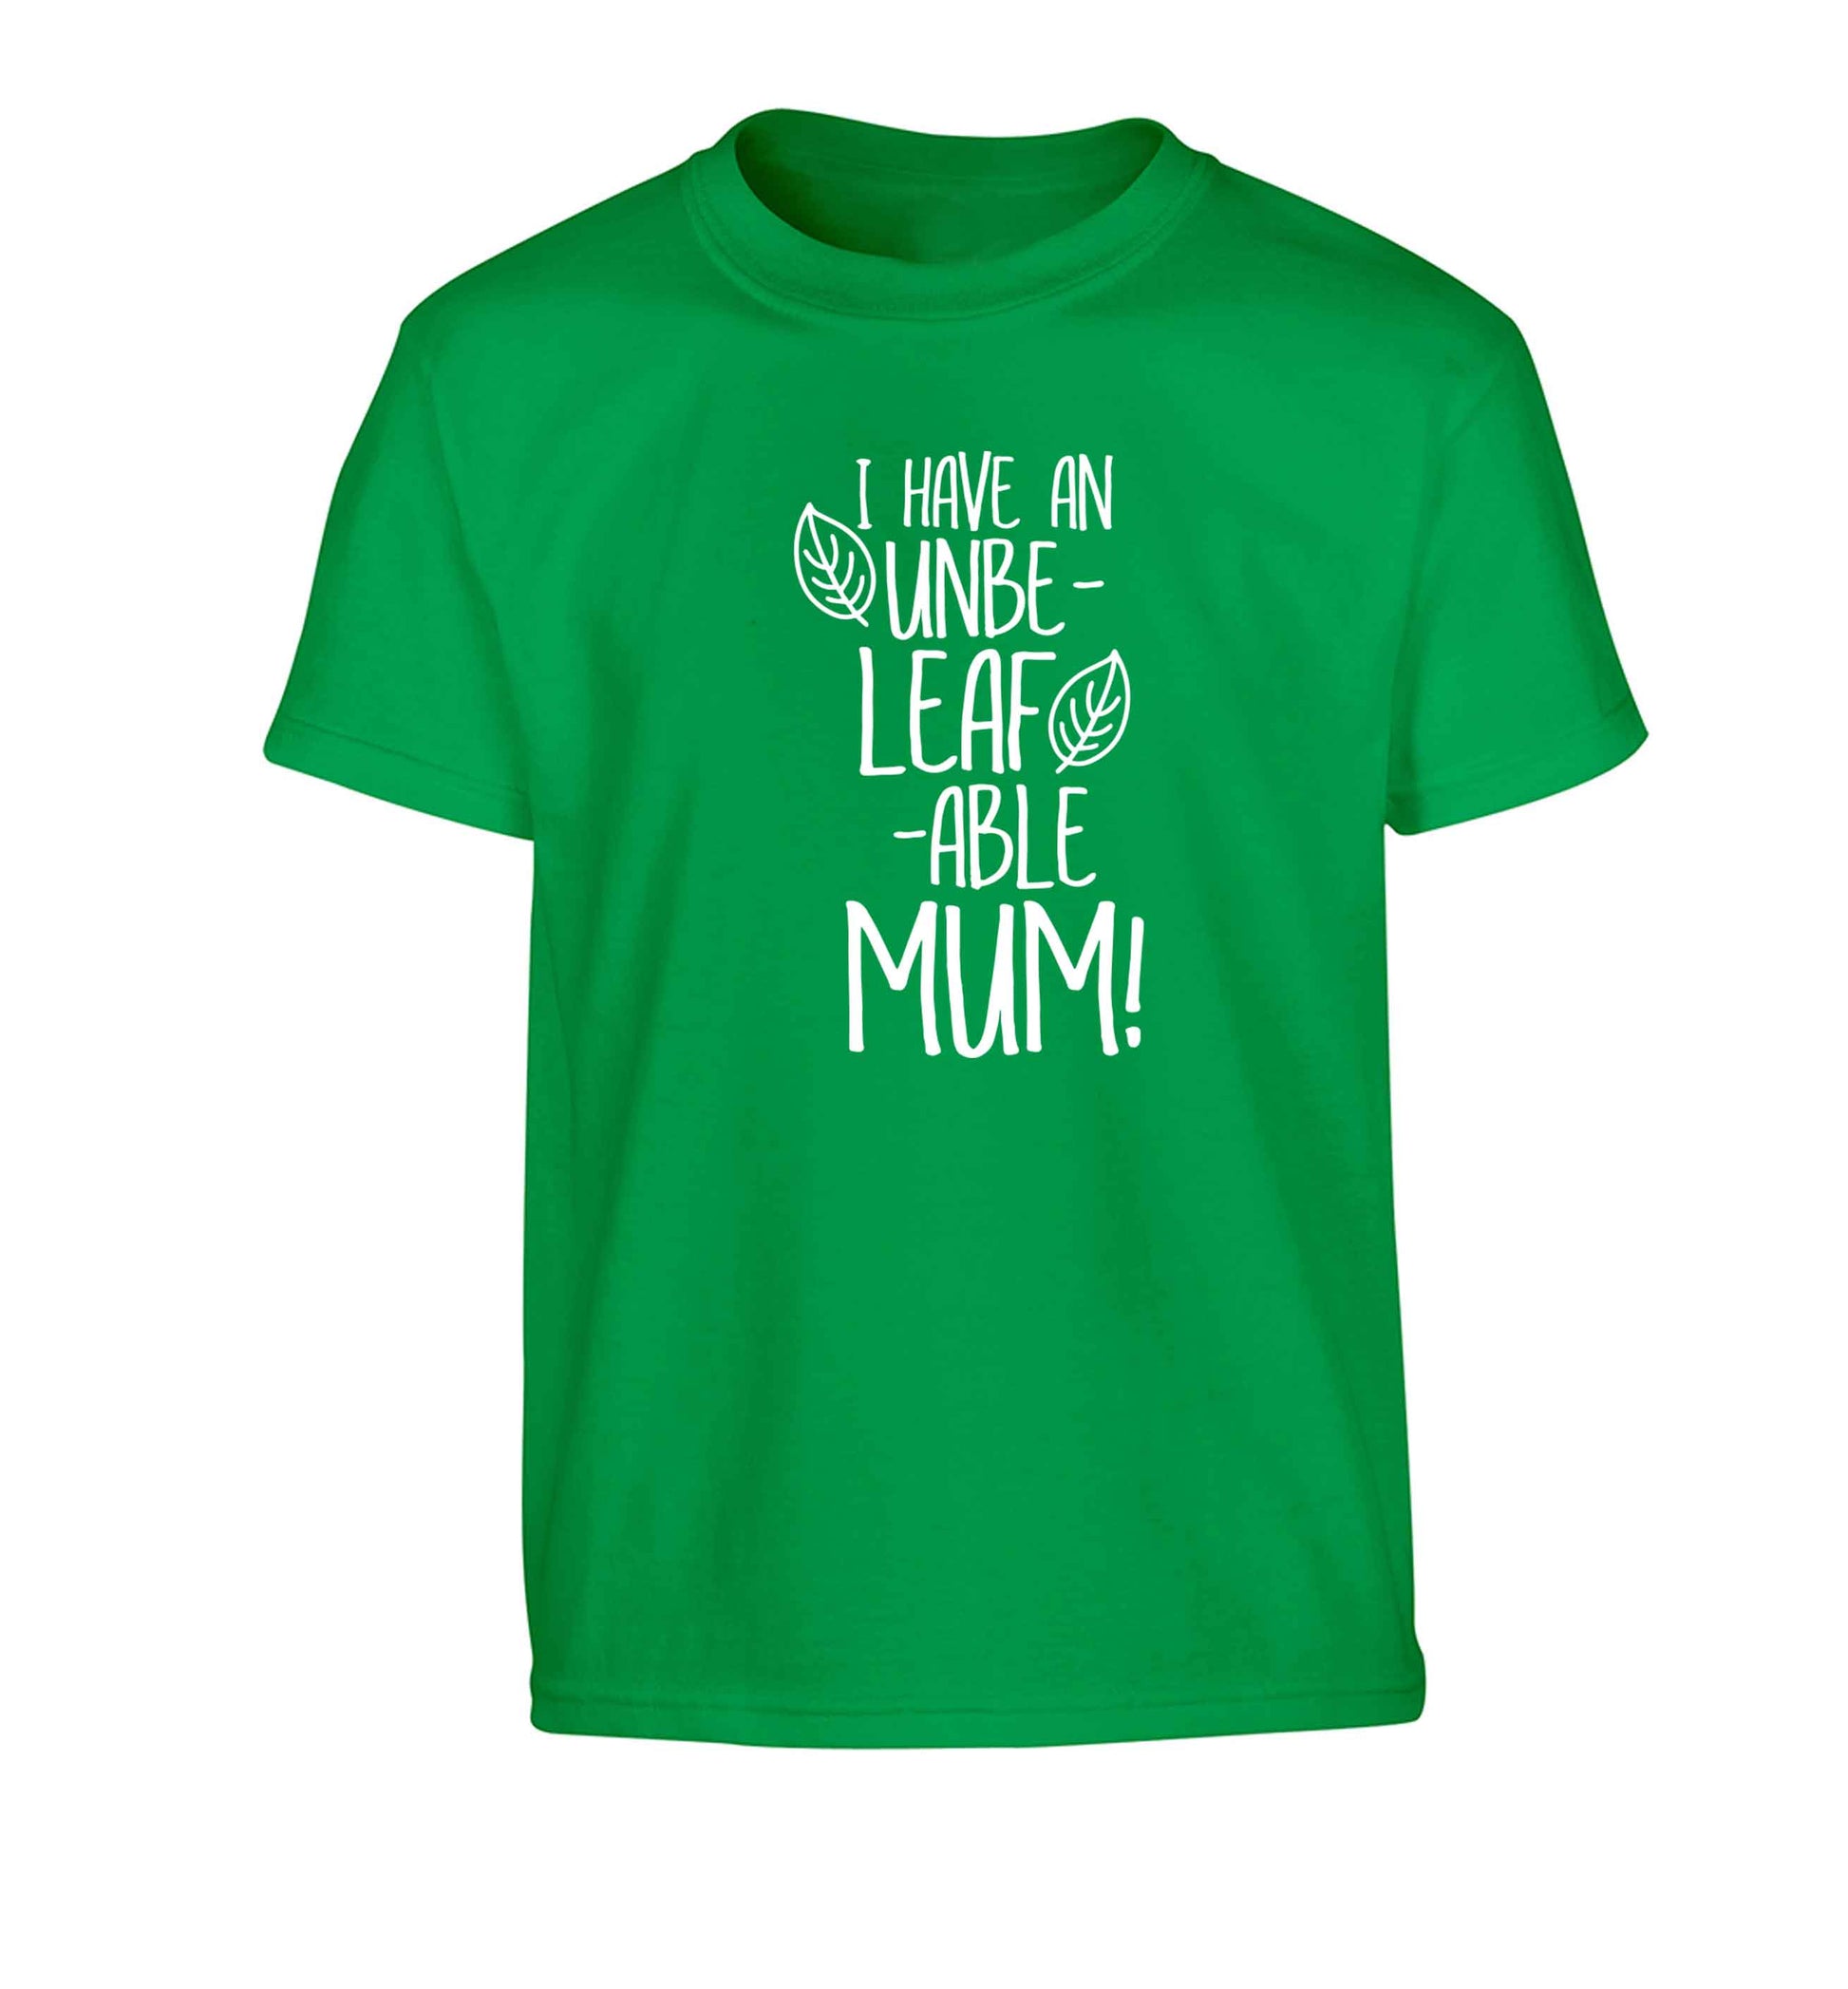 I have an unbeleafable mum! Children's green Tshirt 12-13 Years